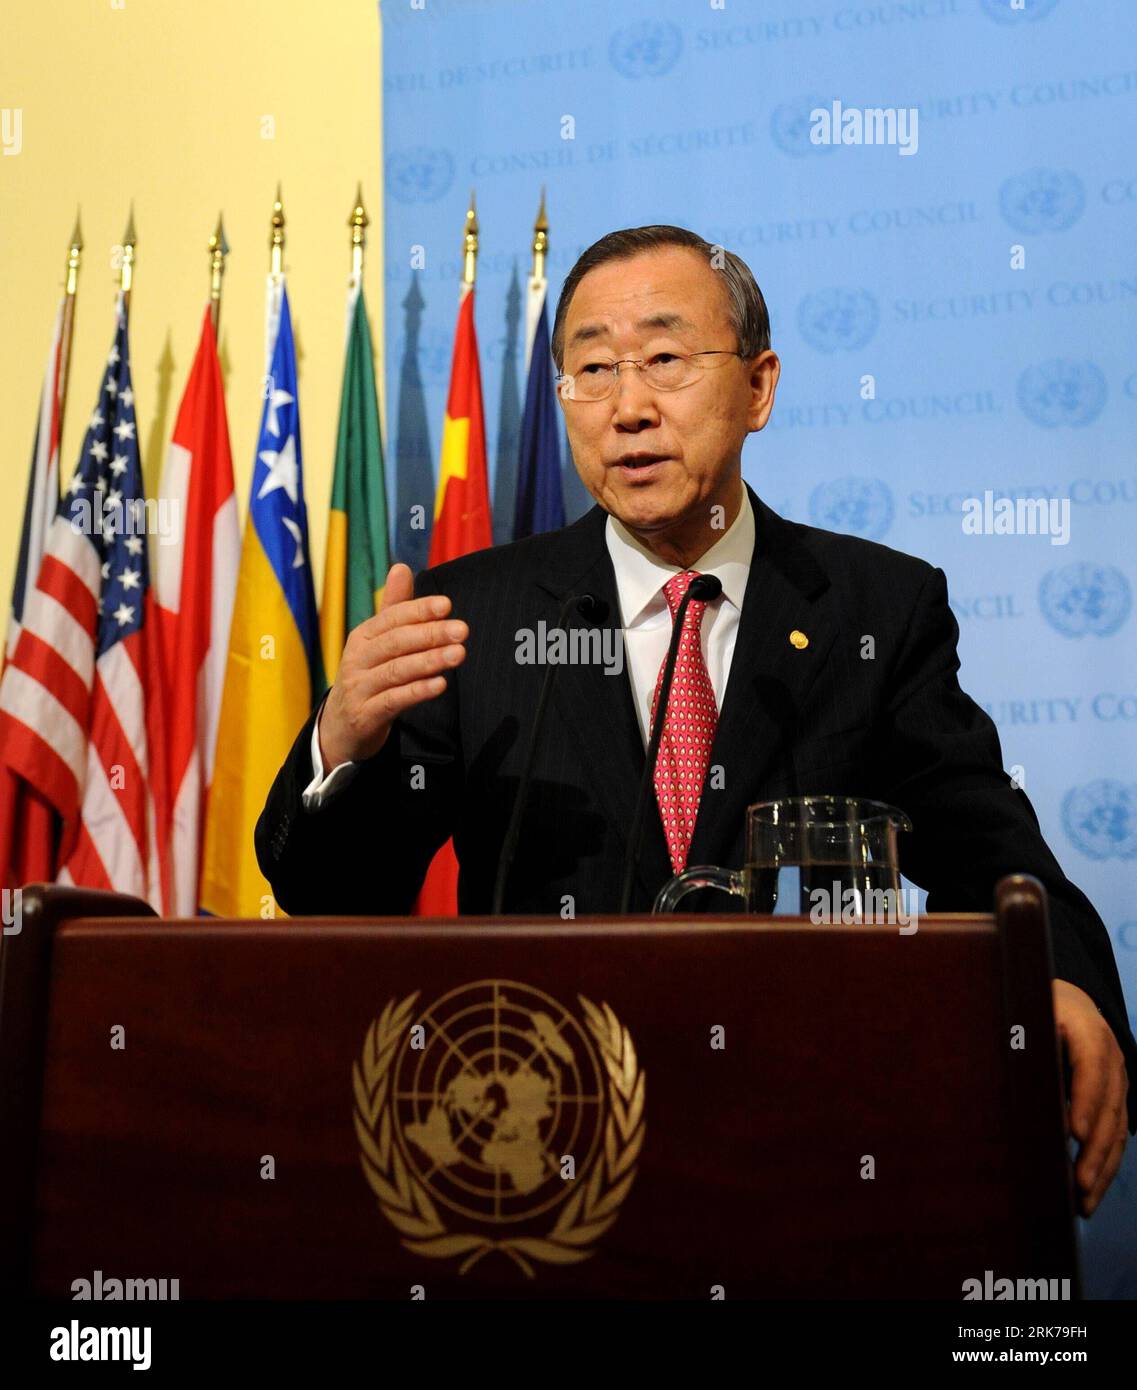 Bildnummer: 53886284  Datum: 24.03.2010  Copyright: imago/Xinhua (100324) -- NEW YORK, March 24, 2010 (Xinhua) -- UN Secretary-General Ban Ki-moon speaks to the media after briefing his recent visit to the Middle East during a Security Council meeting at the UN headquarters in New York, the United States, March 24, 2010. Ban Ki-moon on Wednesday called on Israelis and Palestinians to start negotiations immediately and to take measures to avoid disruptions by extremists. (Xinhua/Shen Hong) (gxr) (4)U.S.-NEW YORK-UN-BAN KI-MOON-ISRAELE AND PALESTINE PUBLICATIONxNOTxINxCHN Politik People premiumd Stock Photo